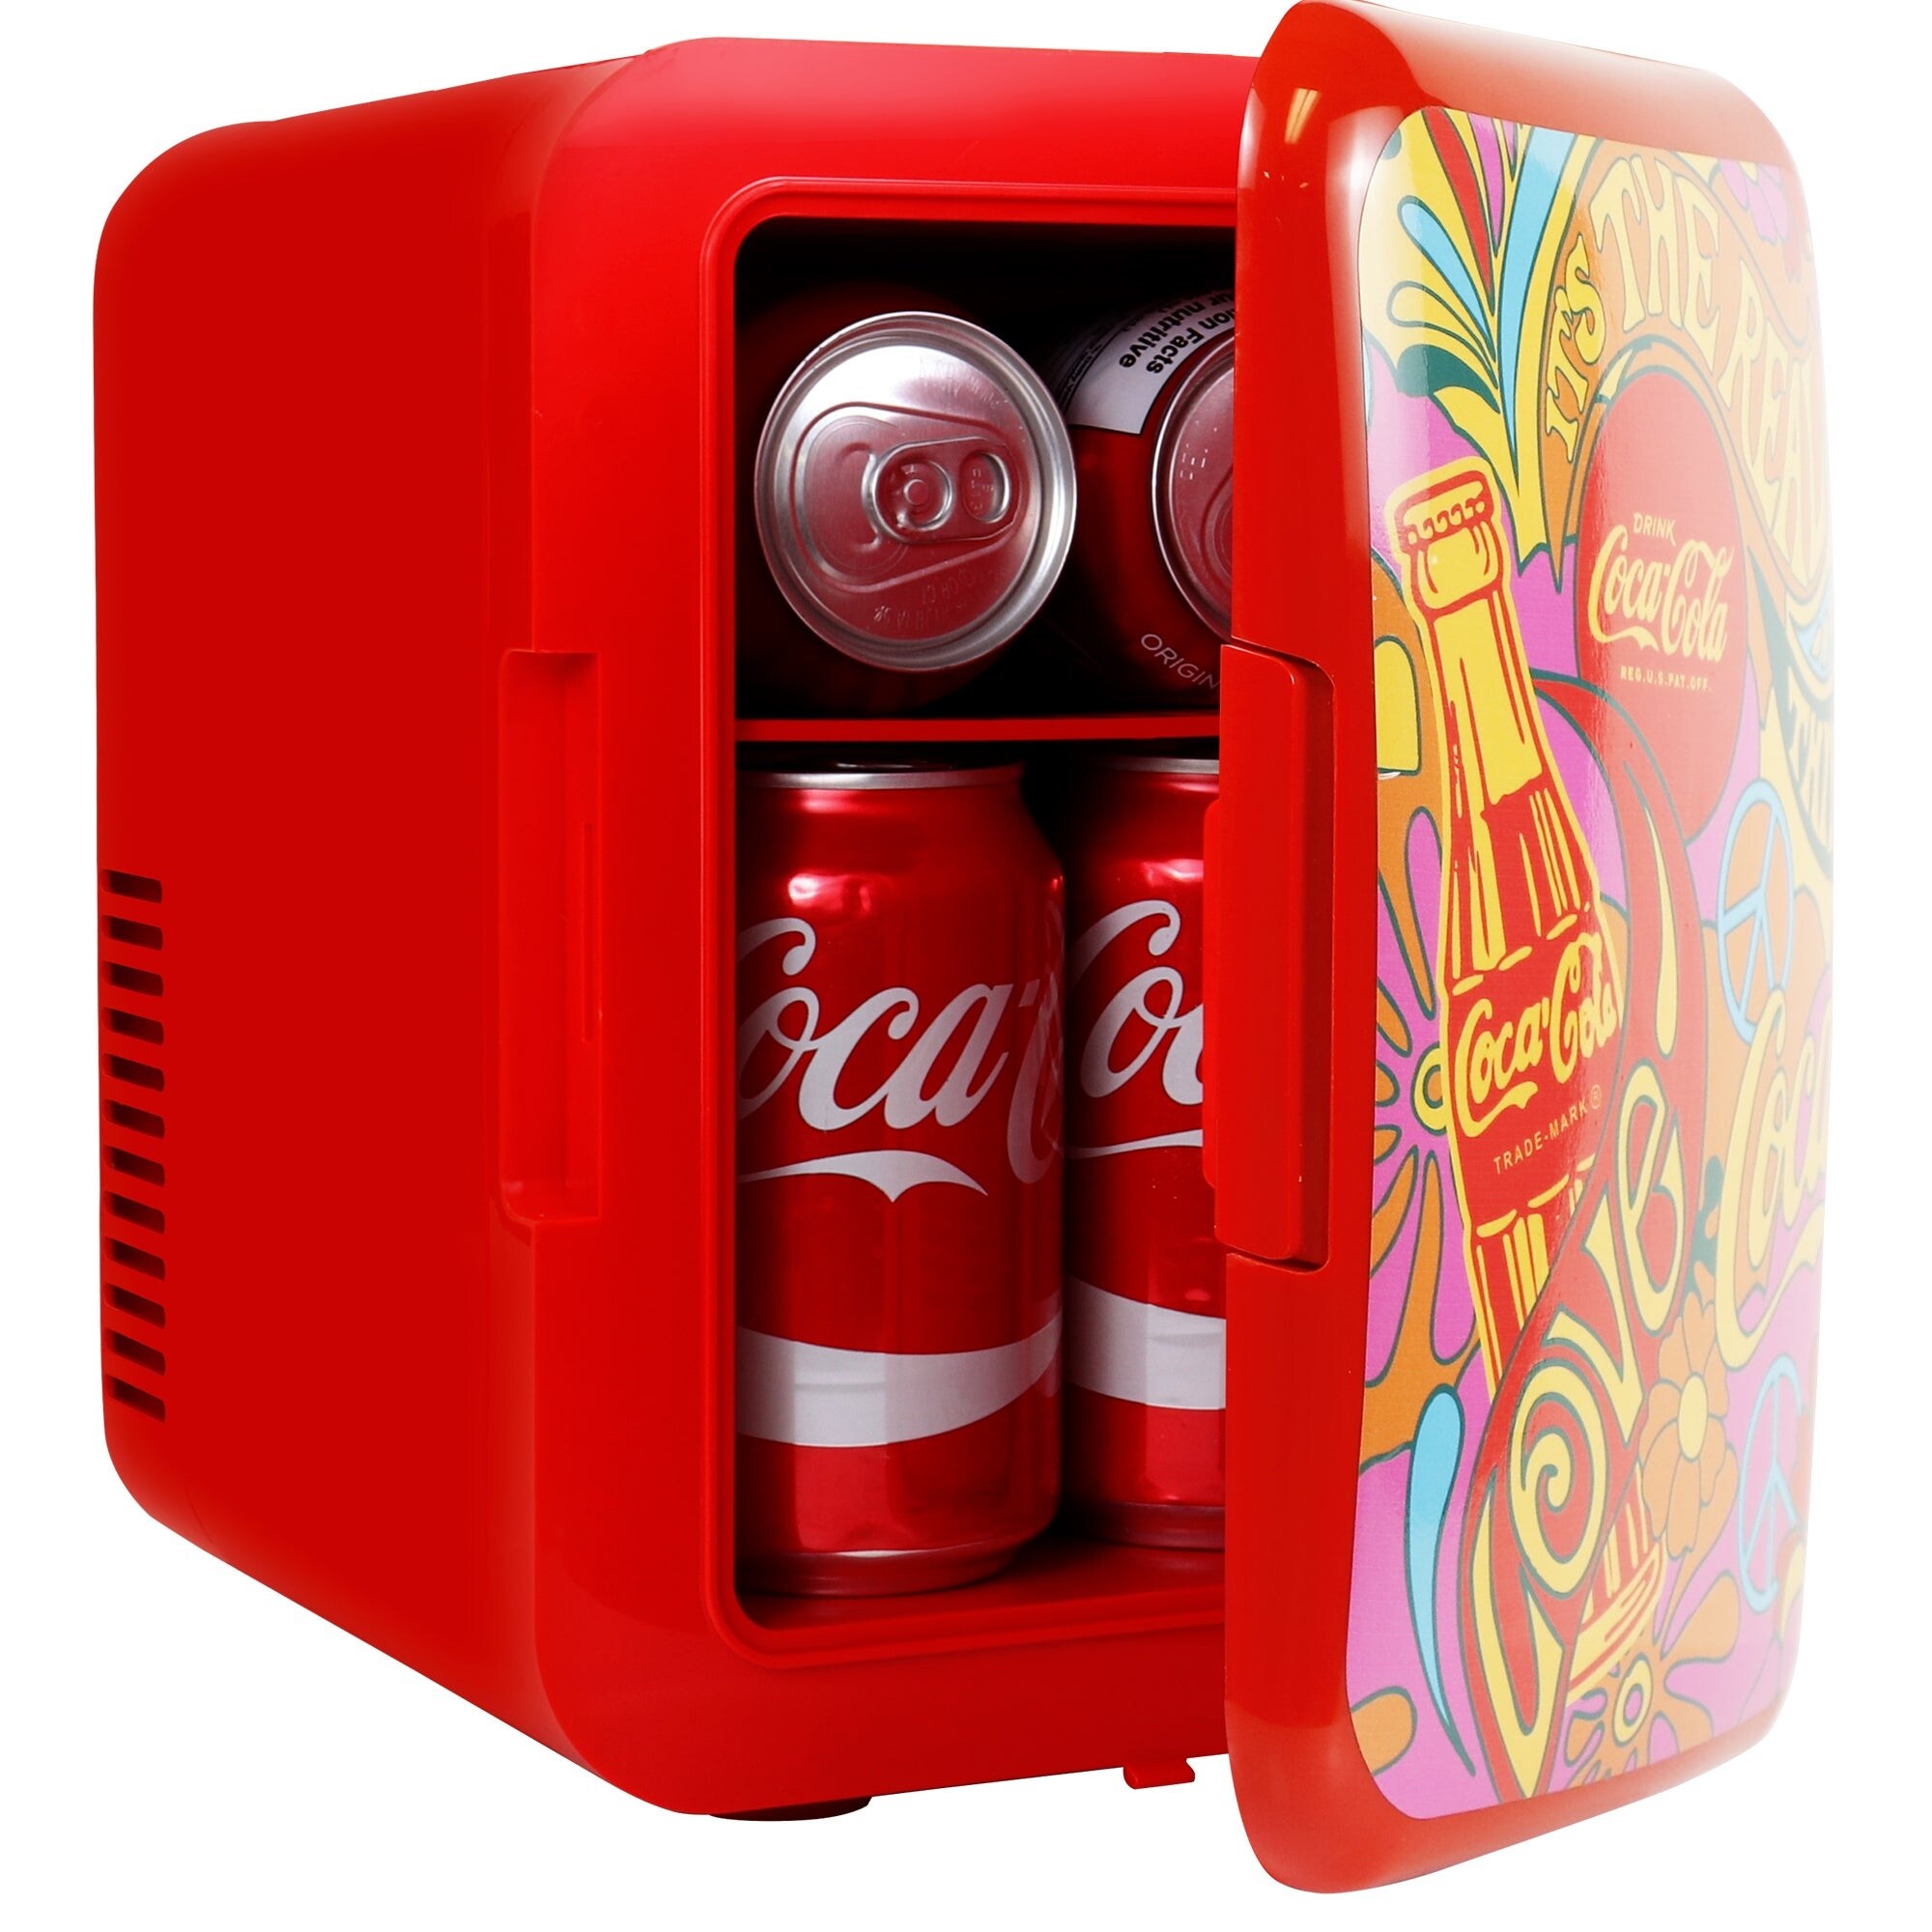 https://ak1.ostkcdn.com/images/products/is/images/direct/2381b888af33925912079d5a52c0148c6e498be8/Coca-Cola-Peace-1971-Series-4L-Cooler-Warmer-w--12V-DC-and-110V-AC-Cords%2C-6-Can-Portable-Mini-Fridge.jpg